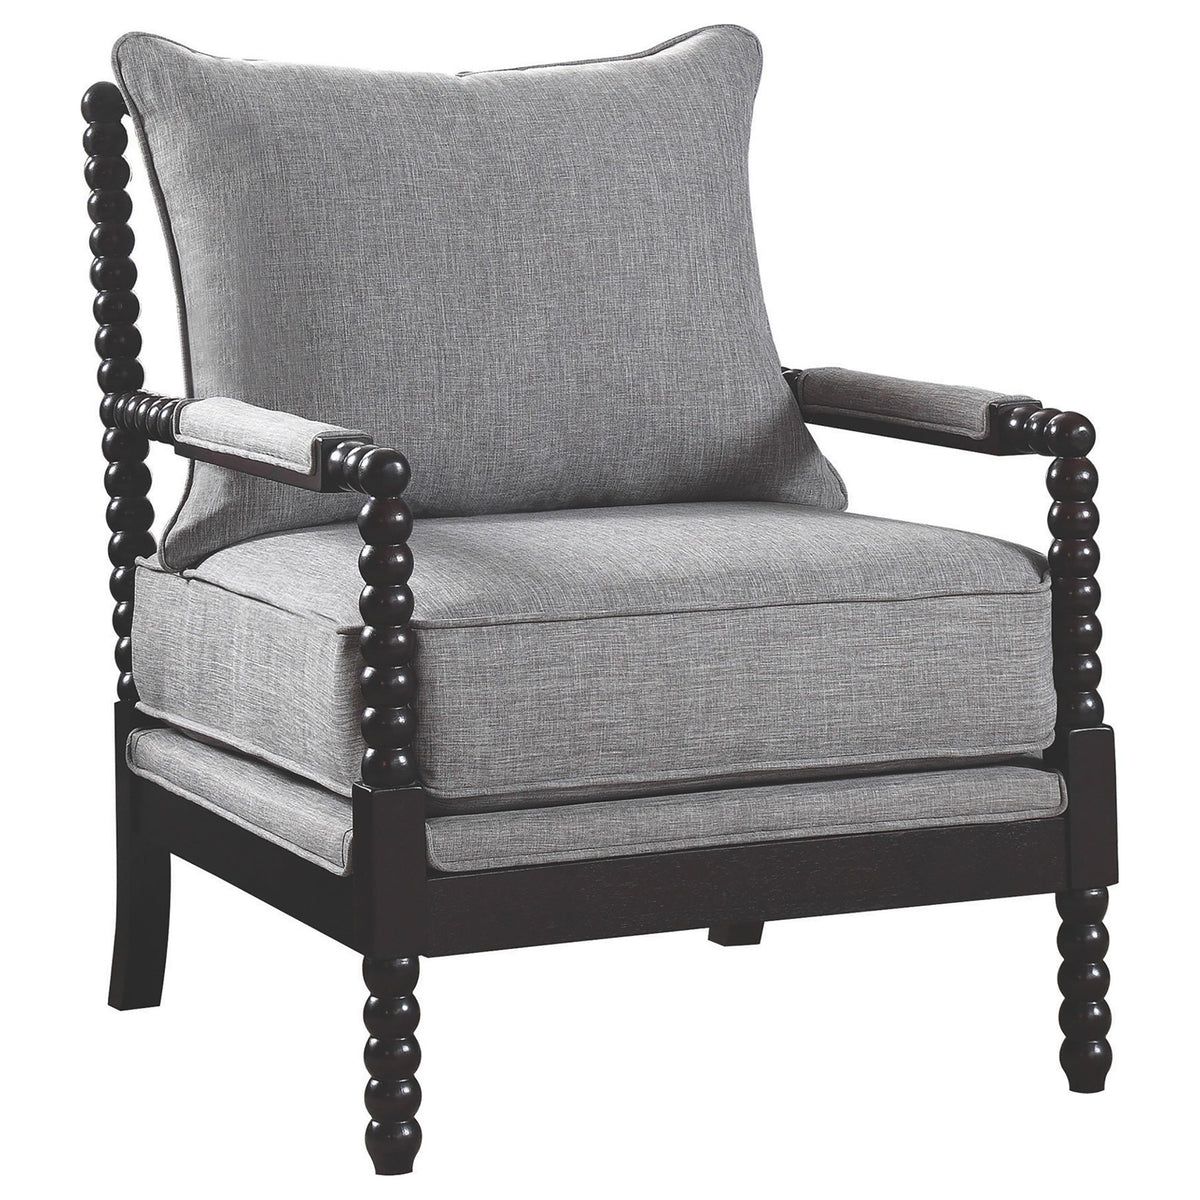 Blanchett Cushion Back Accent Chair Grey and Black  Las Vegas Furniture Stores